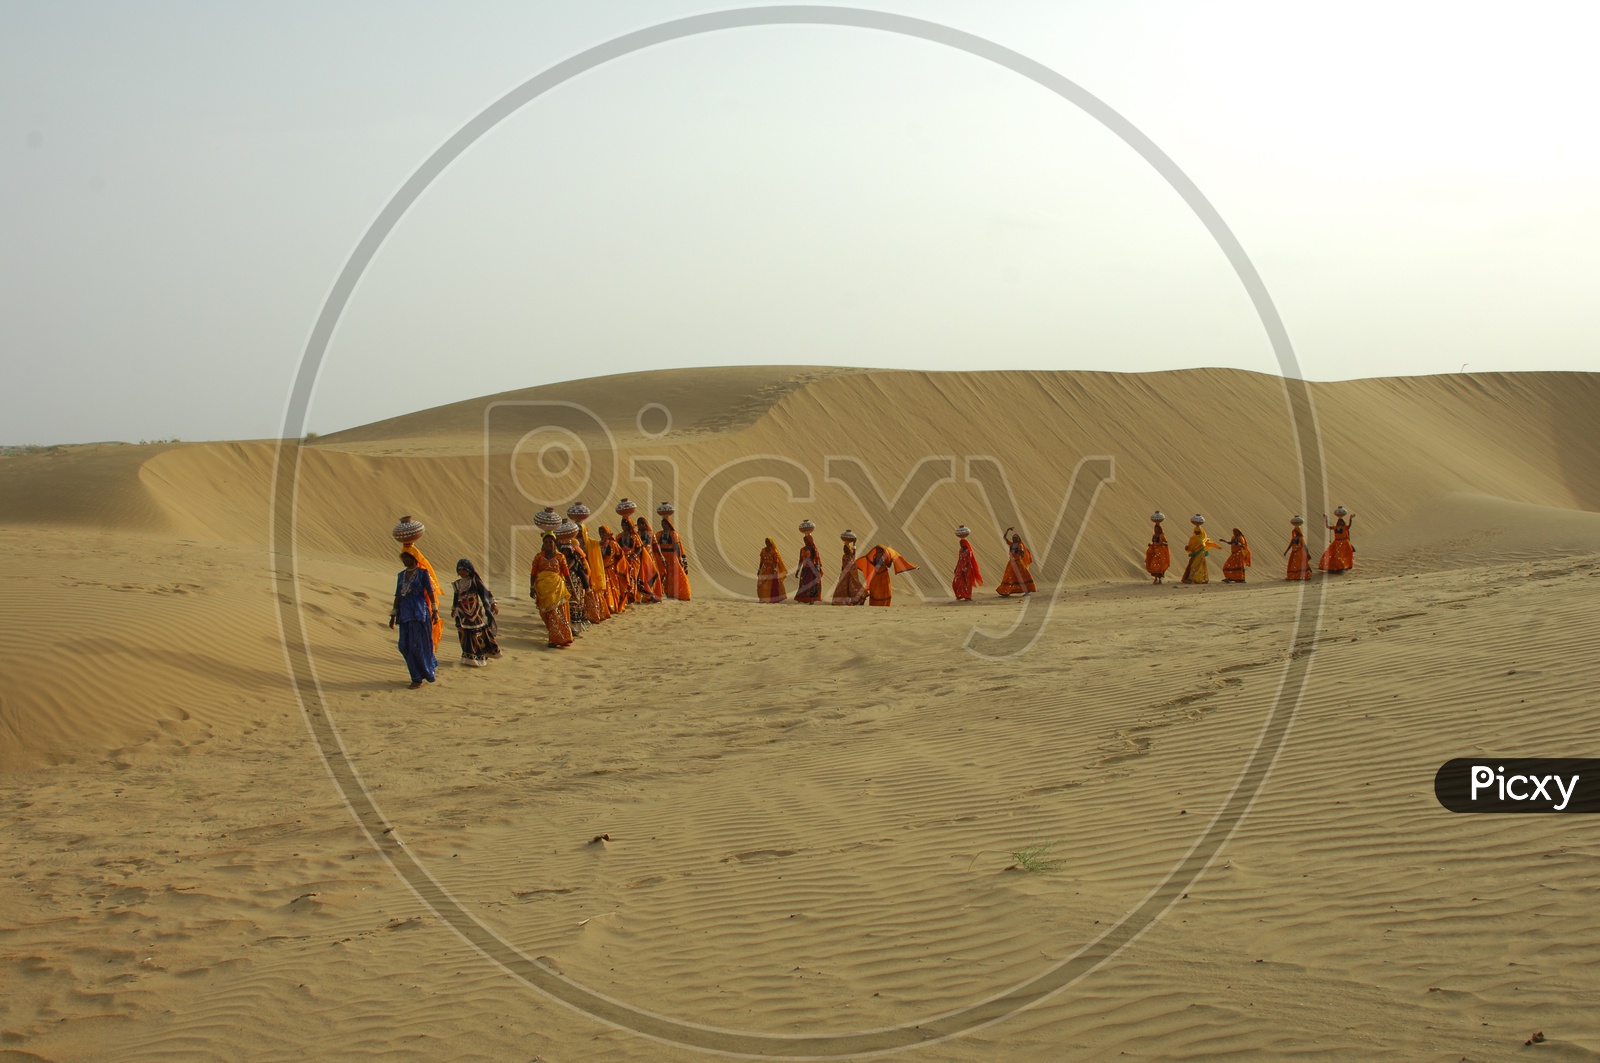 Rajasthani Women carrying water pots on their head in a Desert